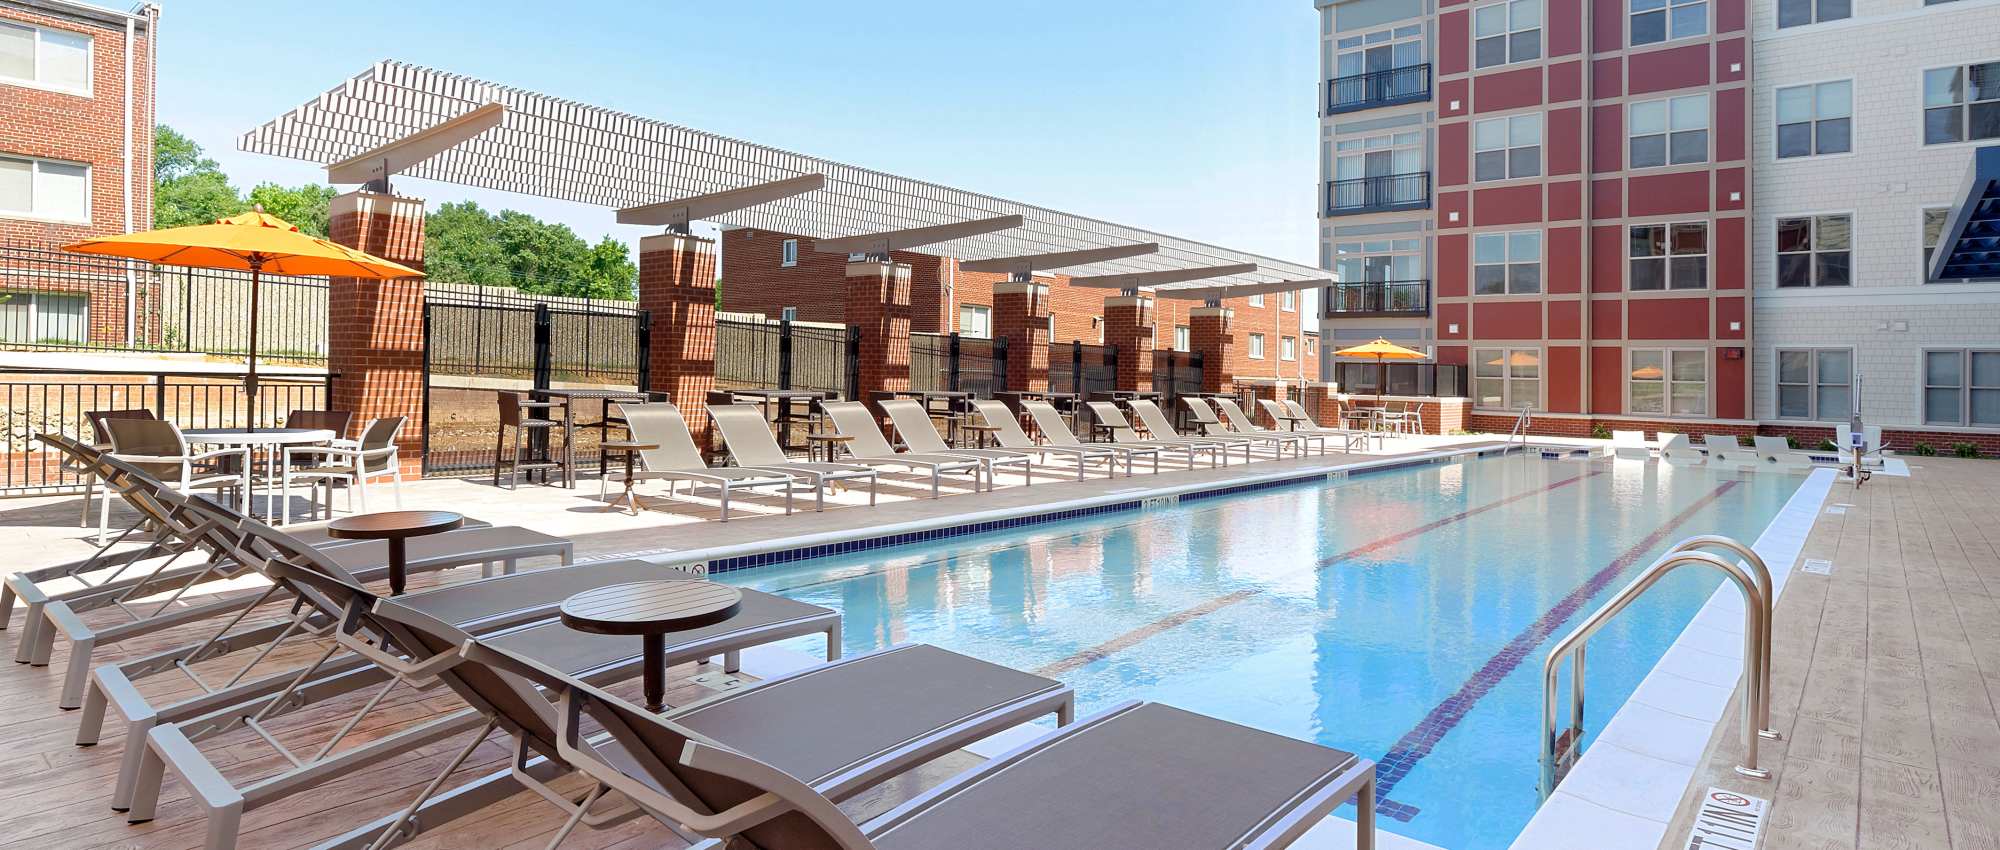 Large pool at 3350 at Alterra in Hyattsville, Maryland